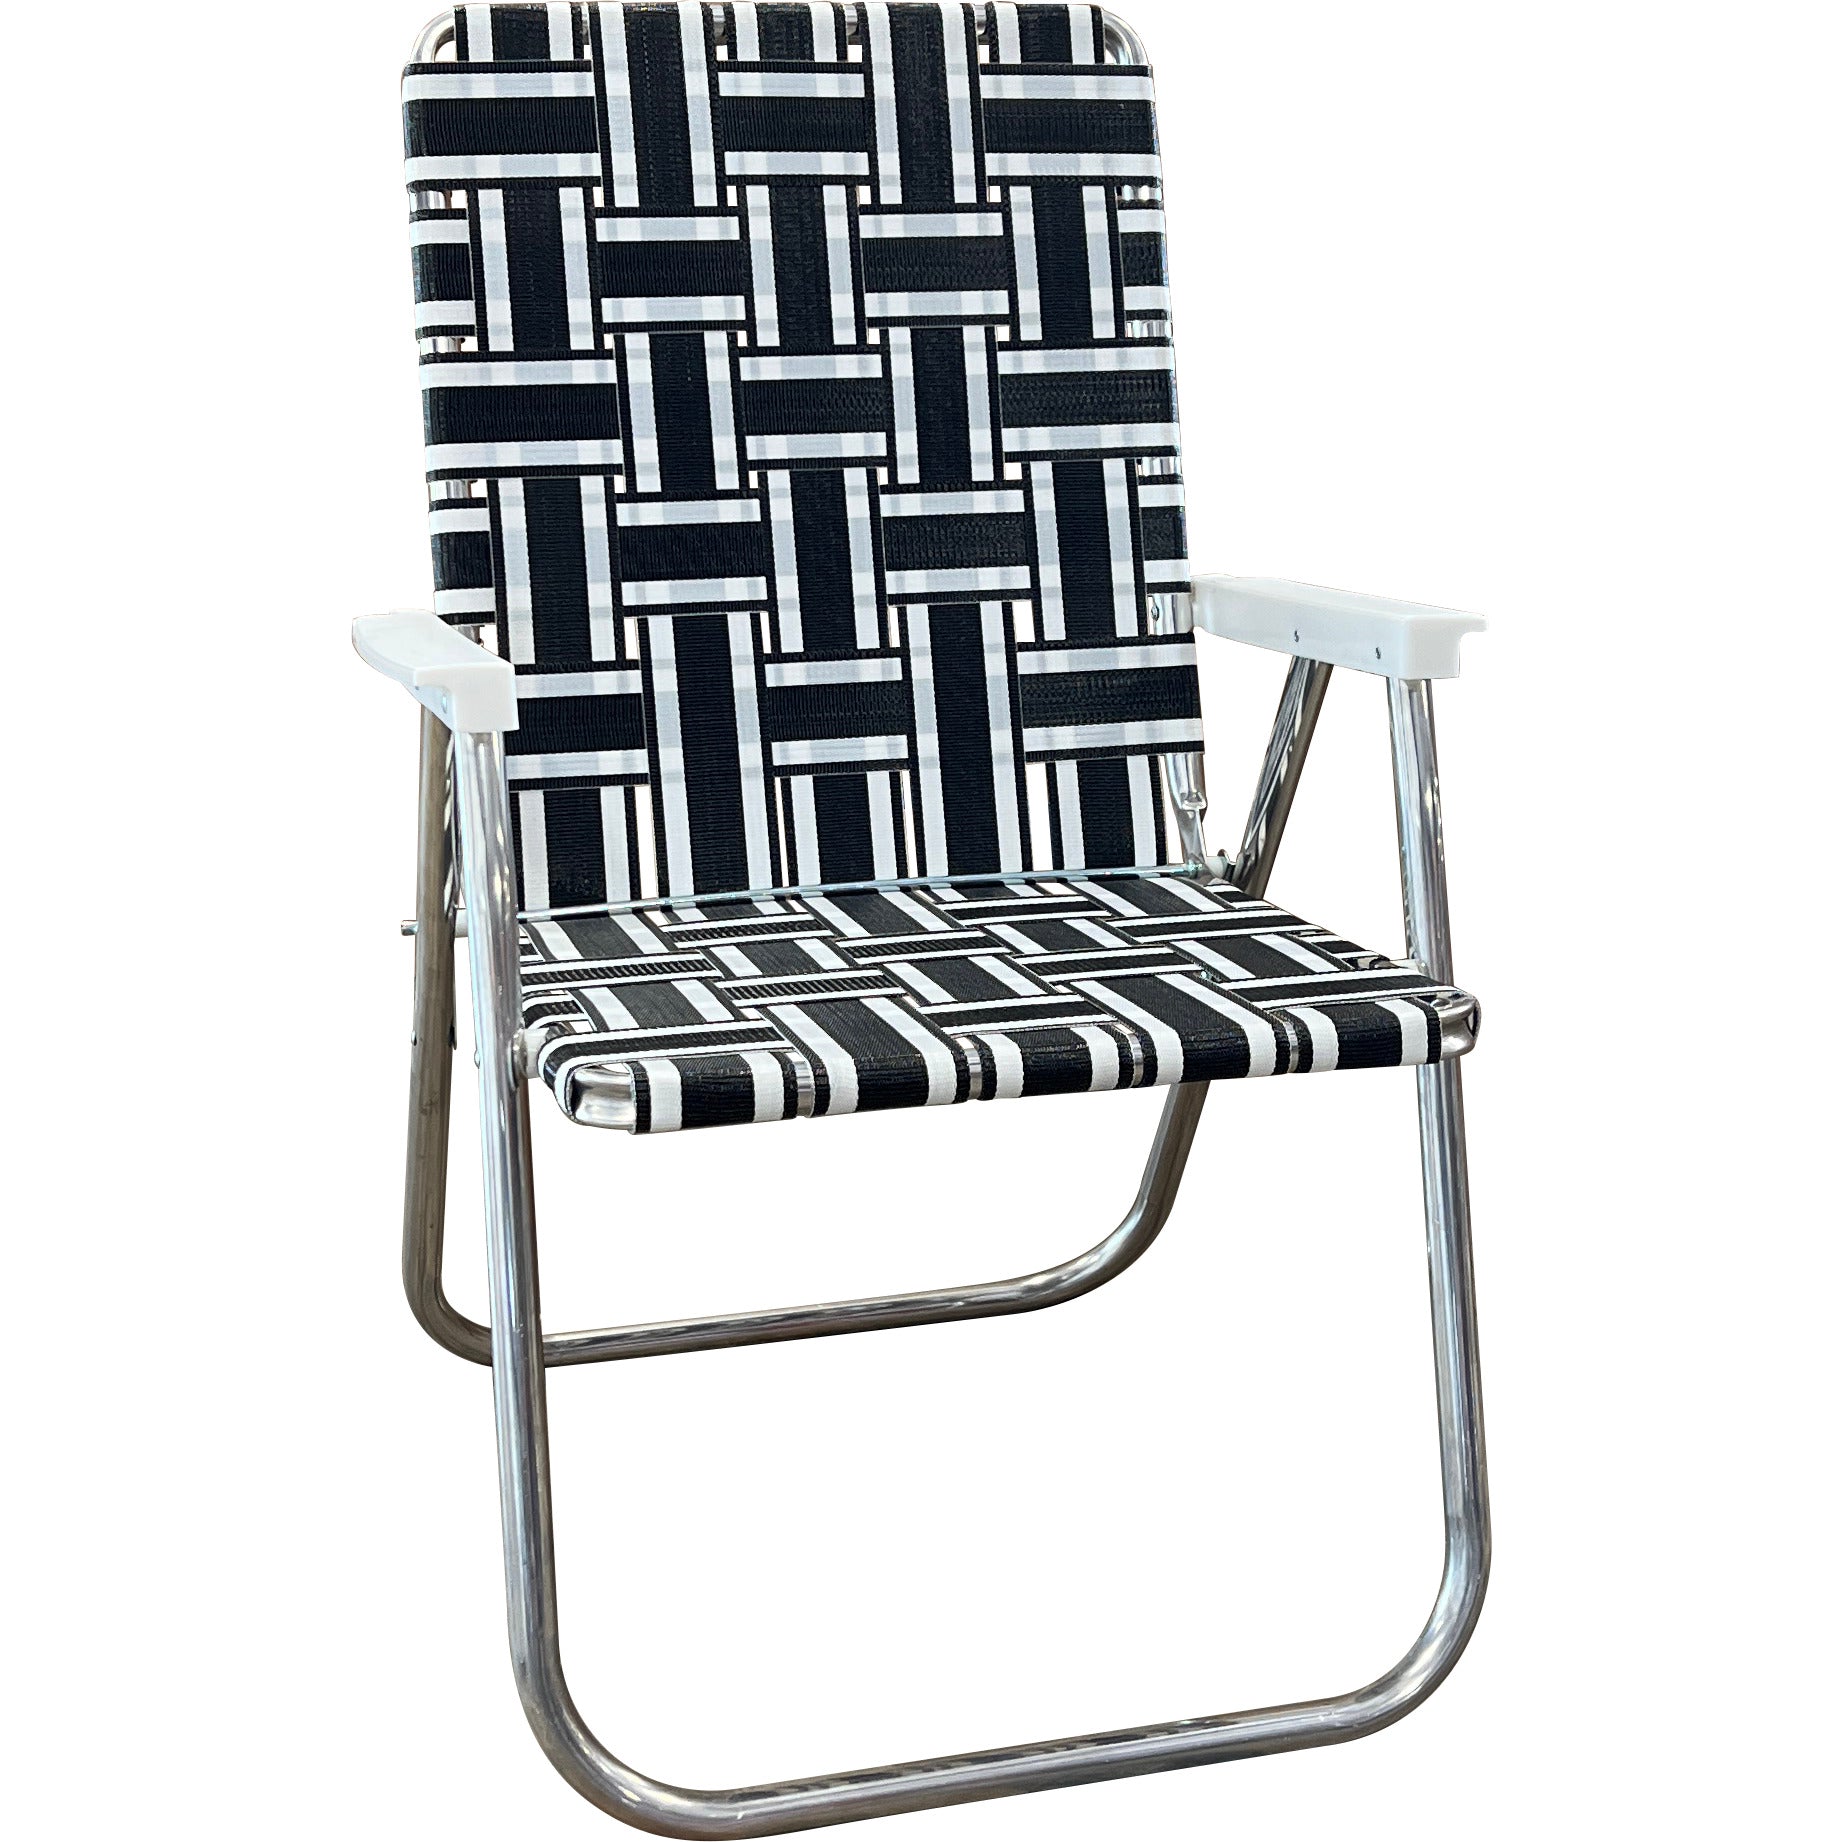 Black and White Stripe Classic Lawn Chair